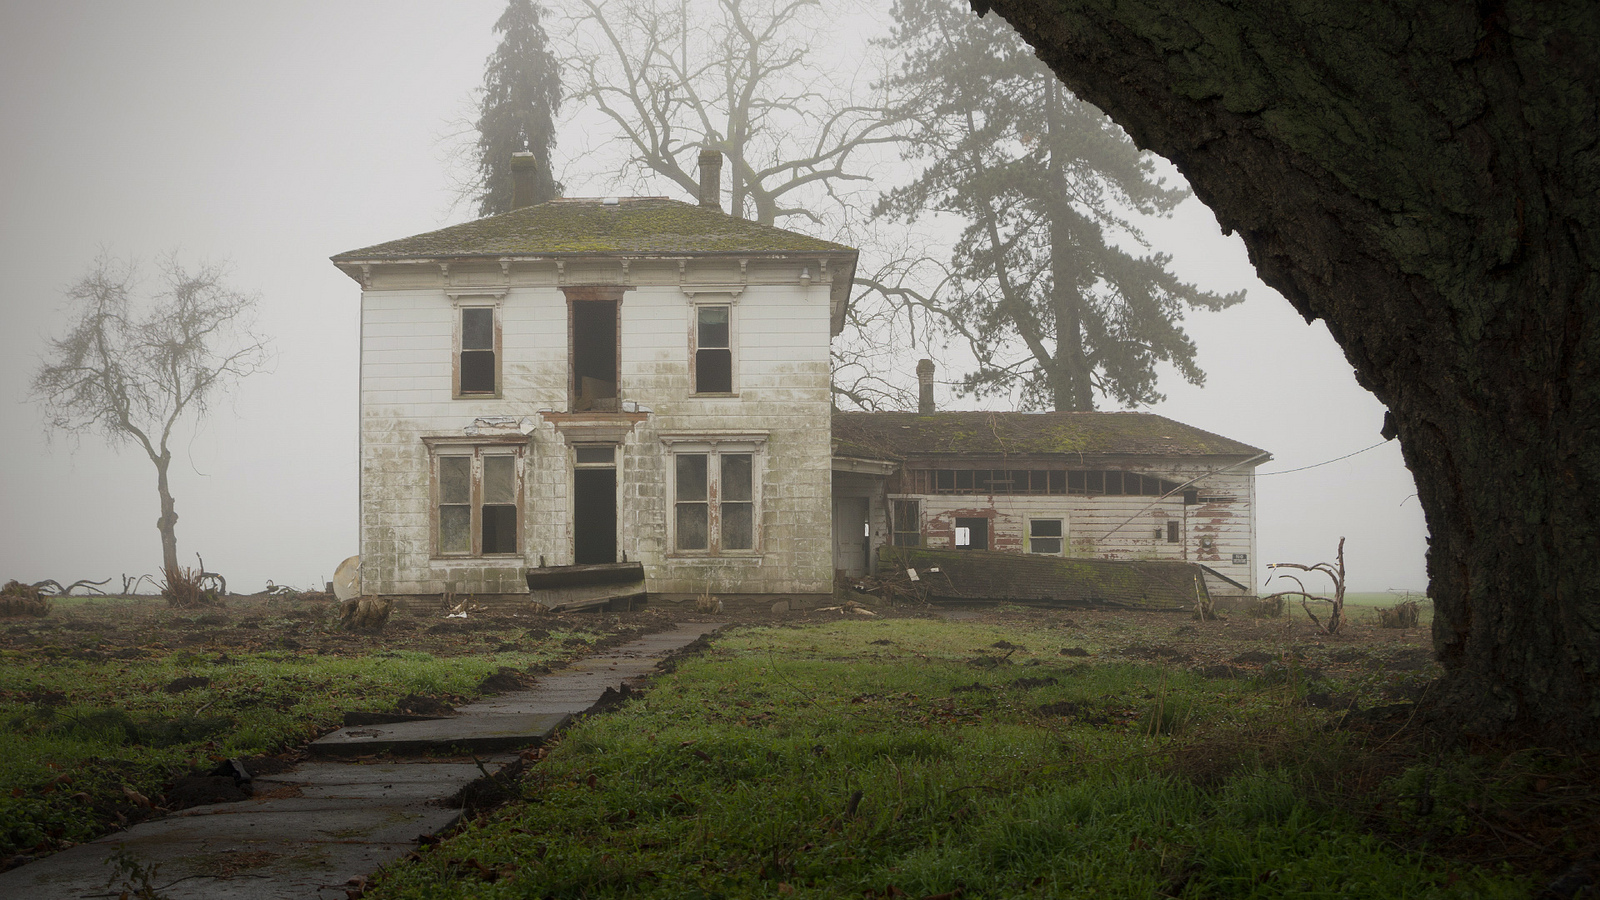 26 Old Abandoned Buildings in Oregon That’ll Amaze You